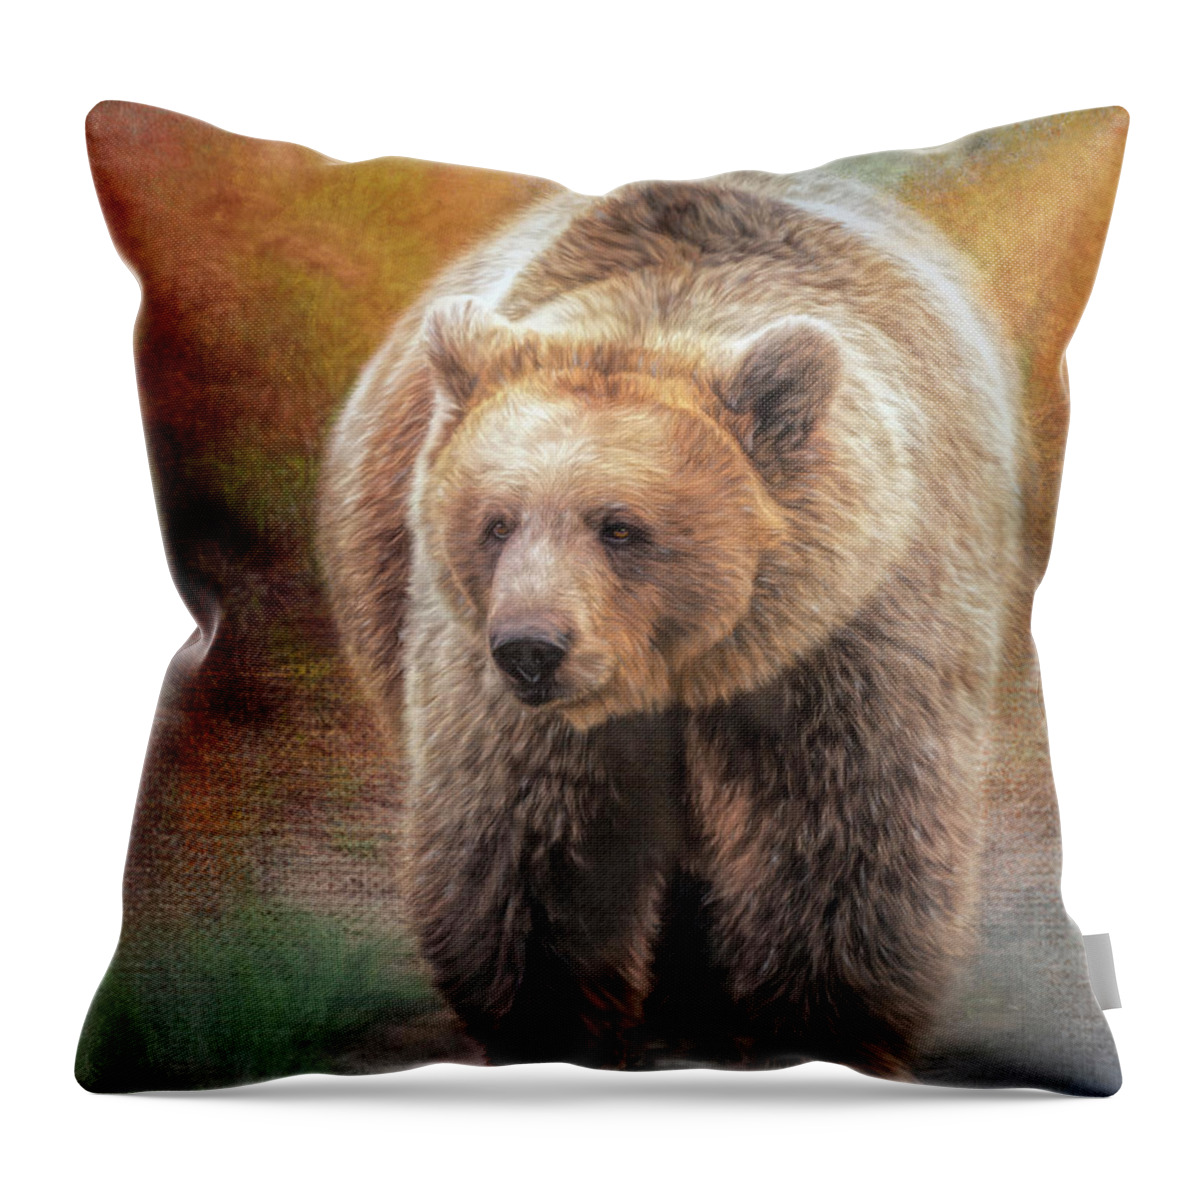 Grizzly Throw Pillow featuring the painting Big Ben Jr. by Jeanette Mahoney